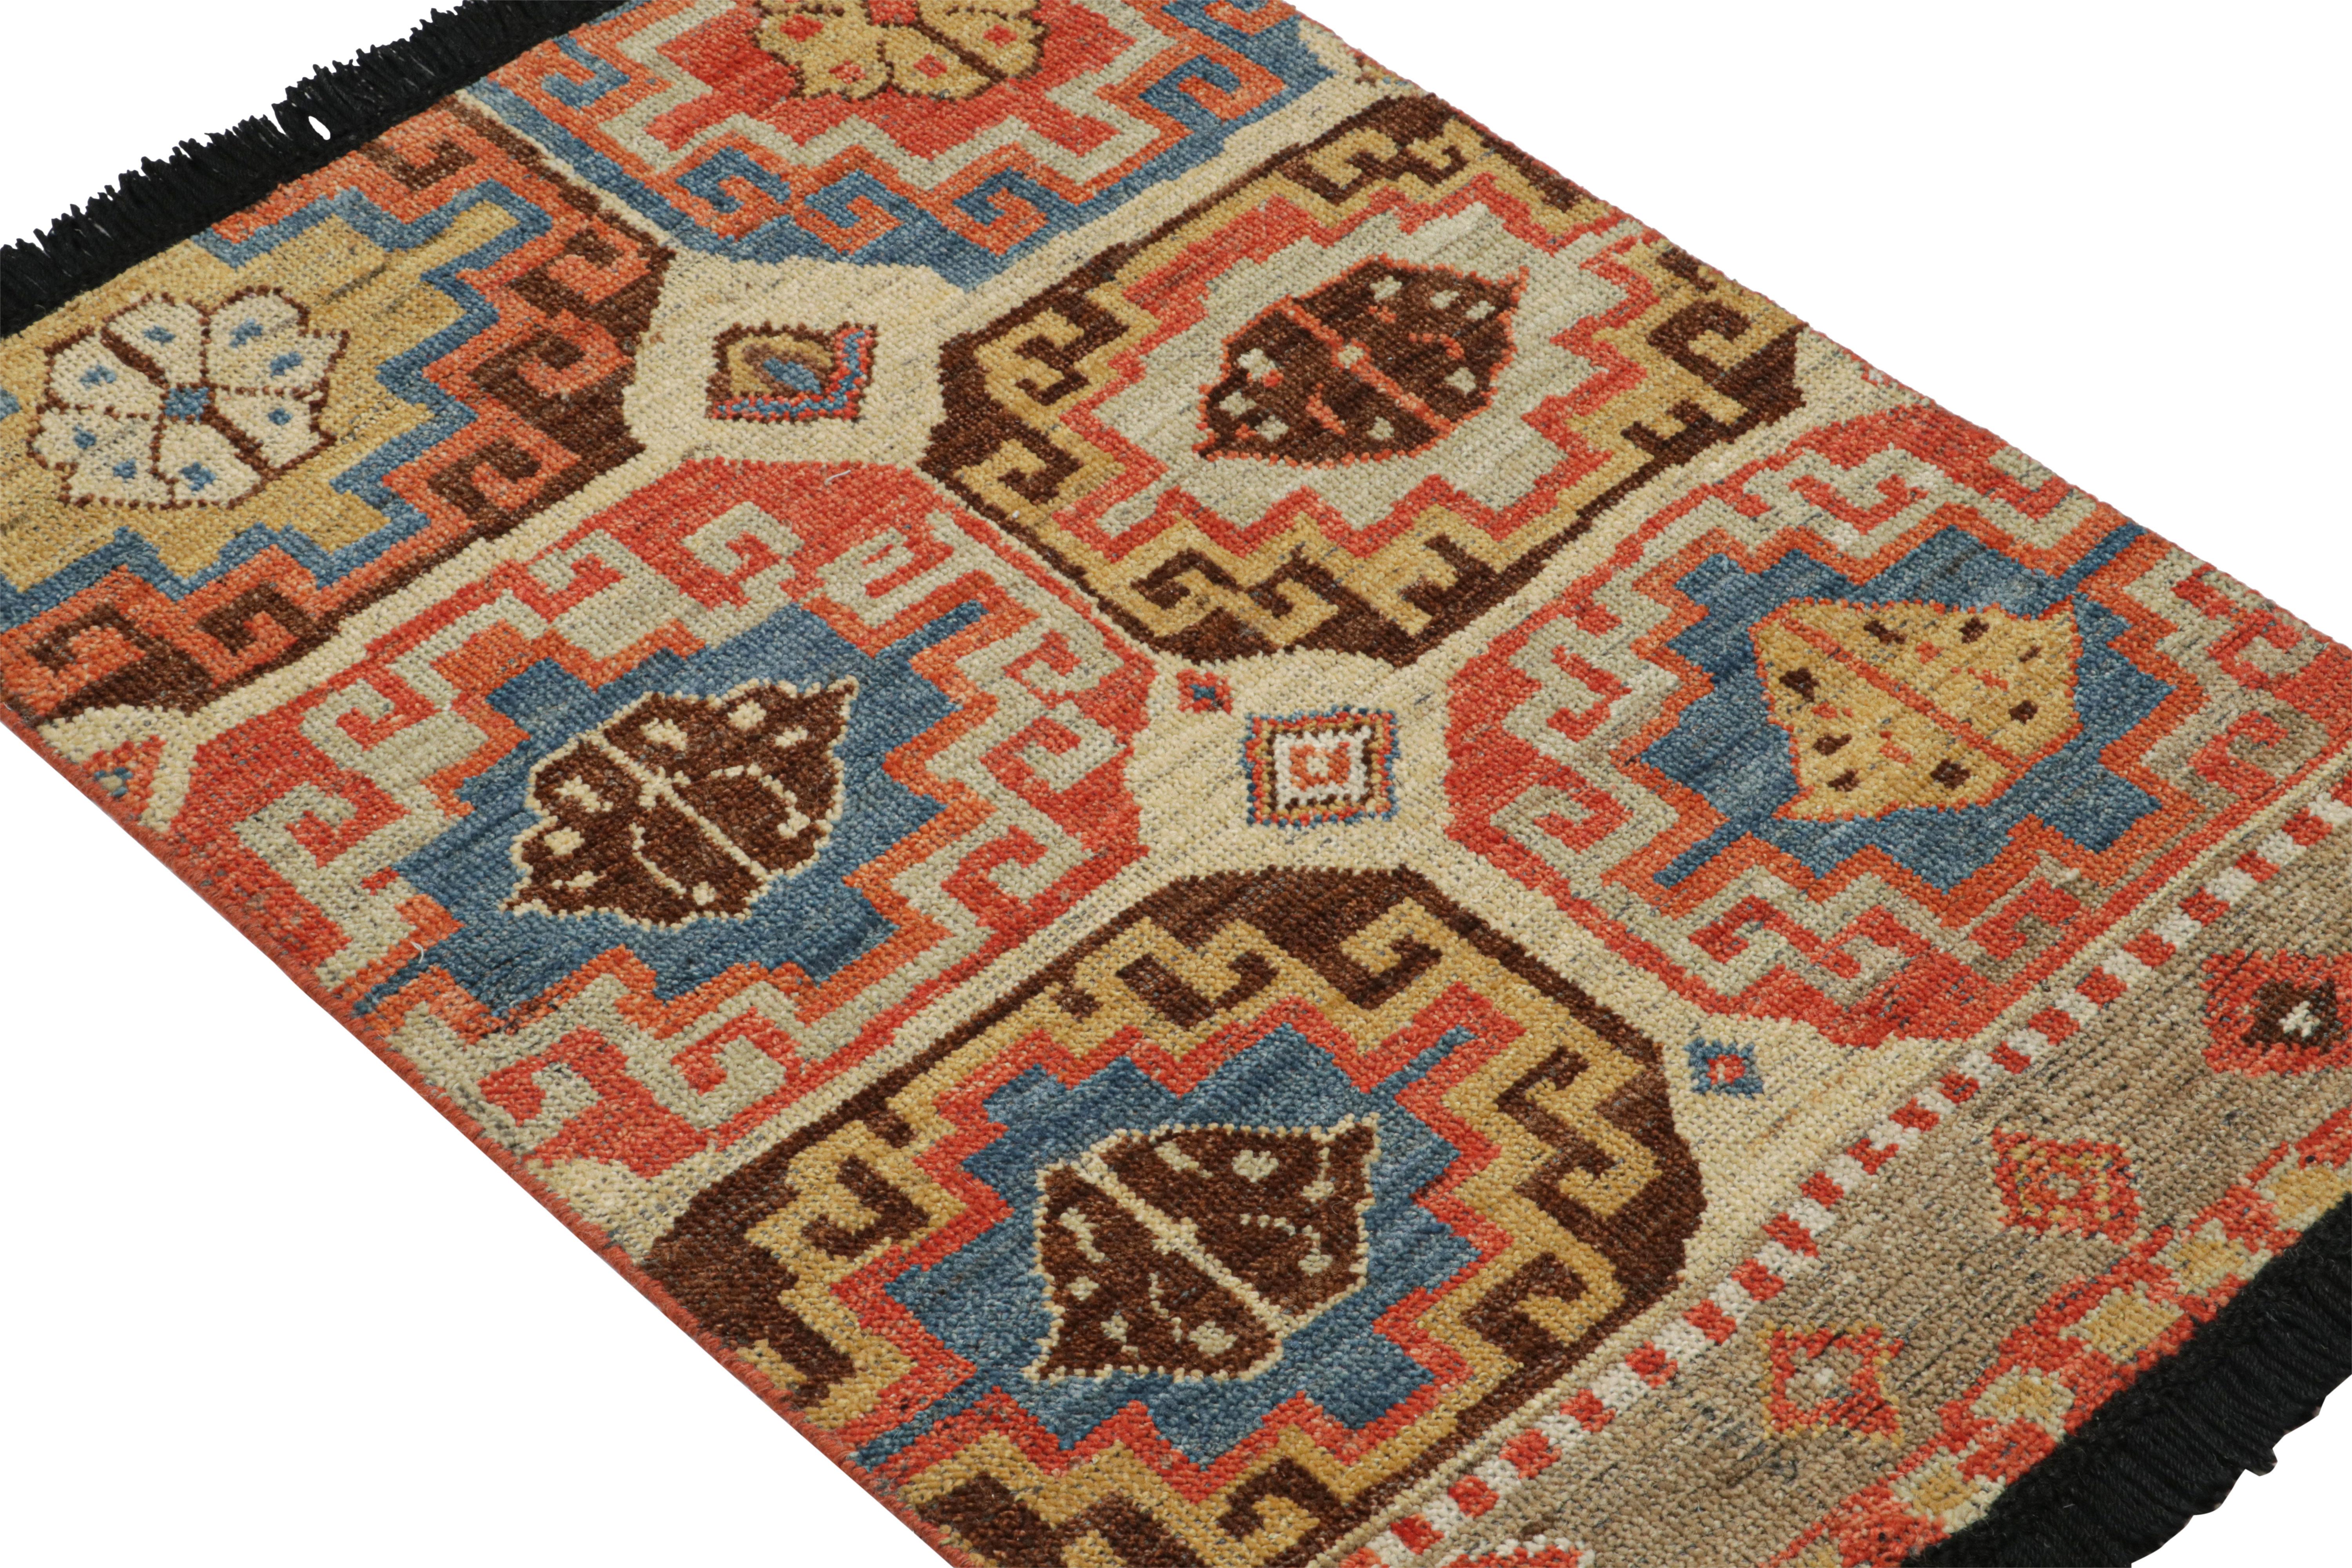 Inspired by antique tribal rugs of Turkish and Caucasian provenance, particularly in its love of medallions in the geometric gul style, this 2x3 rug is hand-knotted in wool. 

On the Design: 

Particularly inspired by the nomadic tribal pieces, it